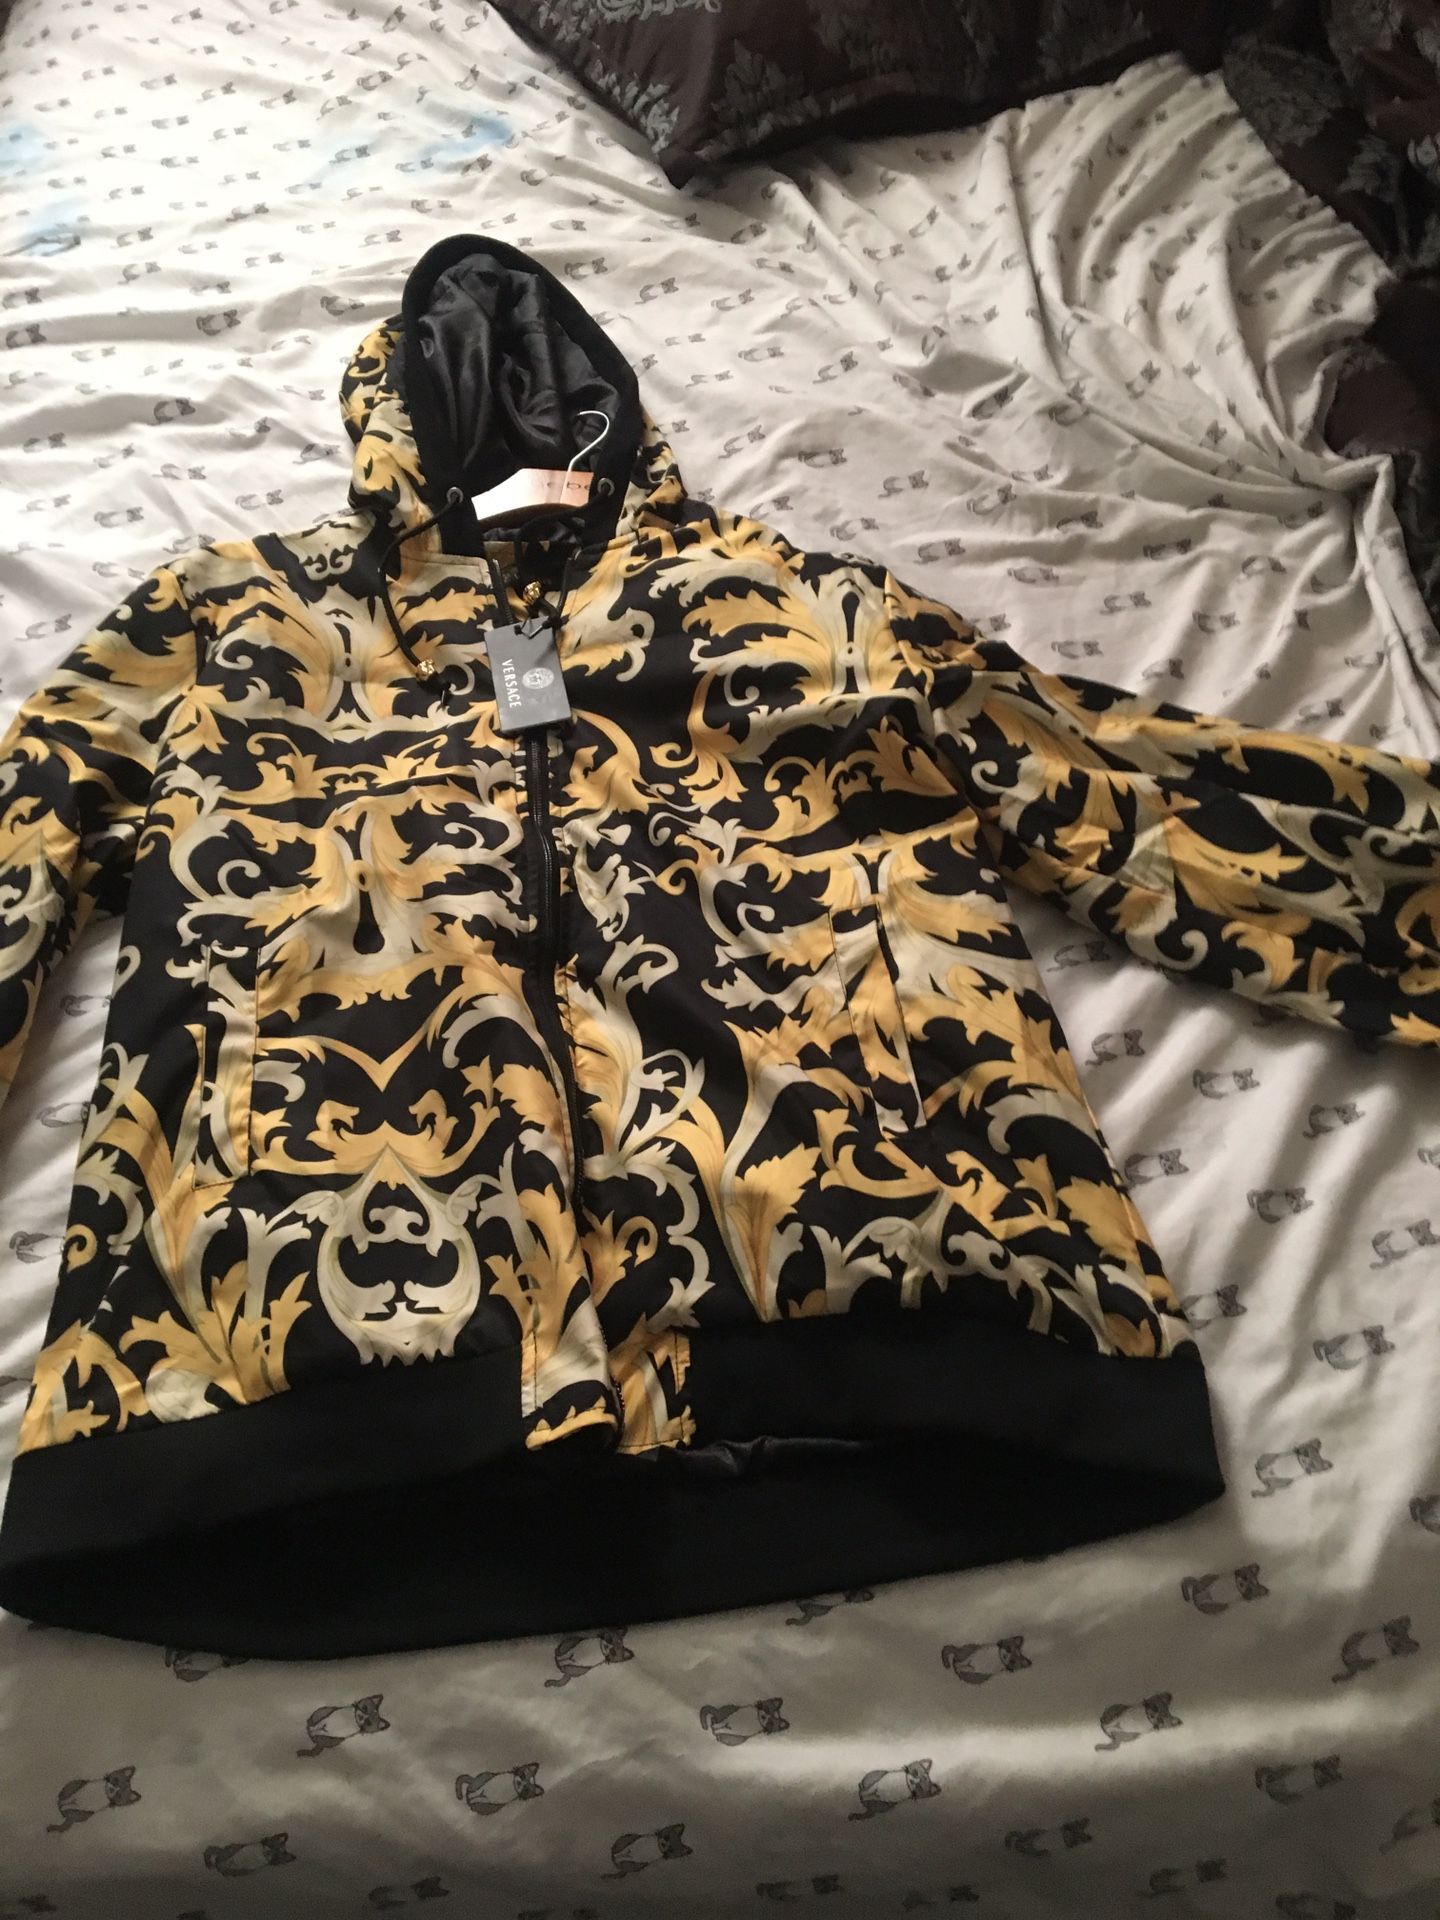 Brand New Versace Jacket..Authentic and never been worn.Will discuss price with only seriously interested buyers..